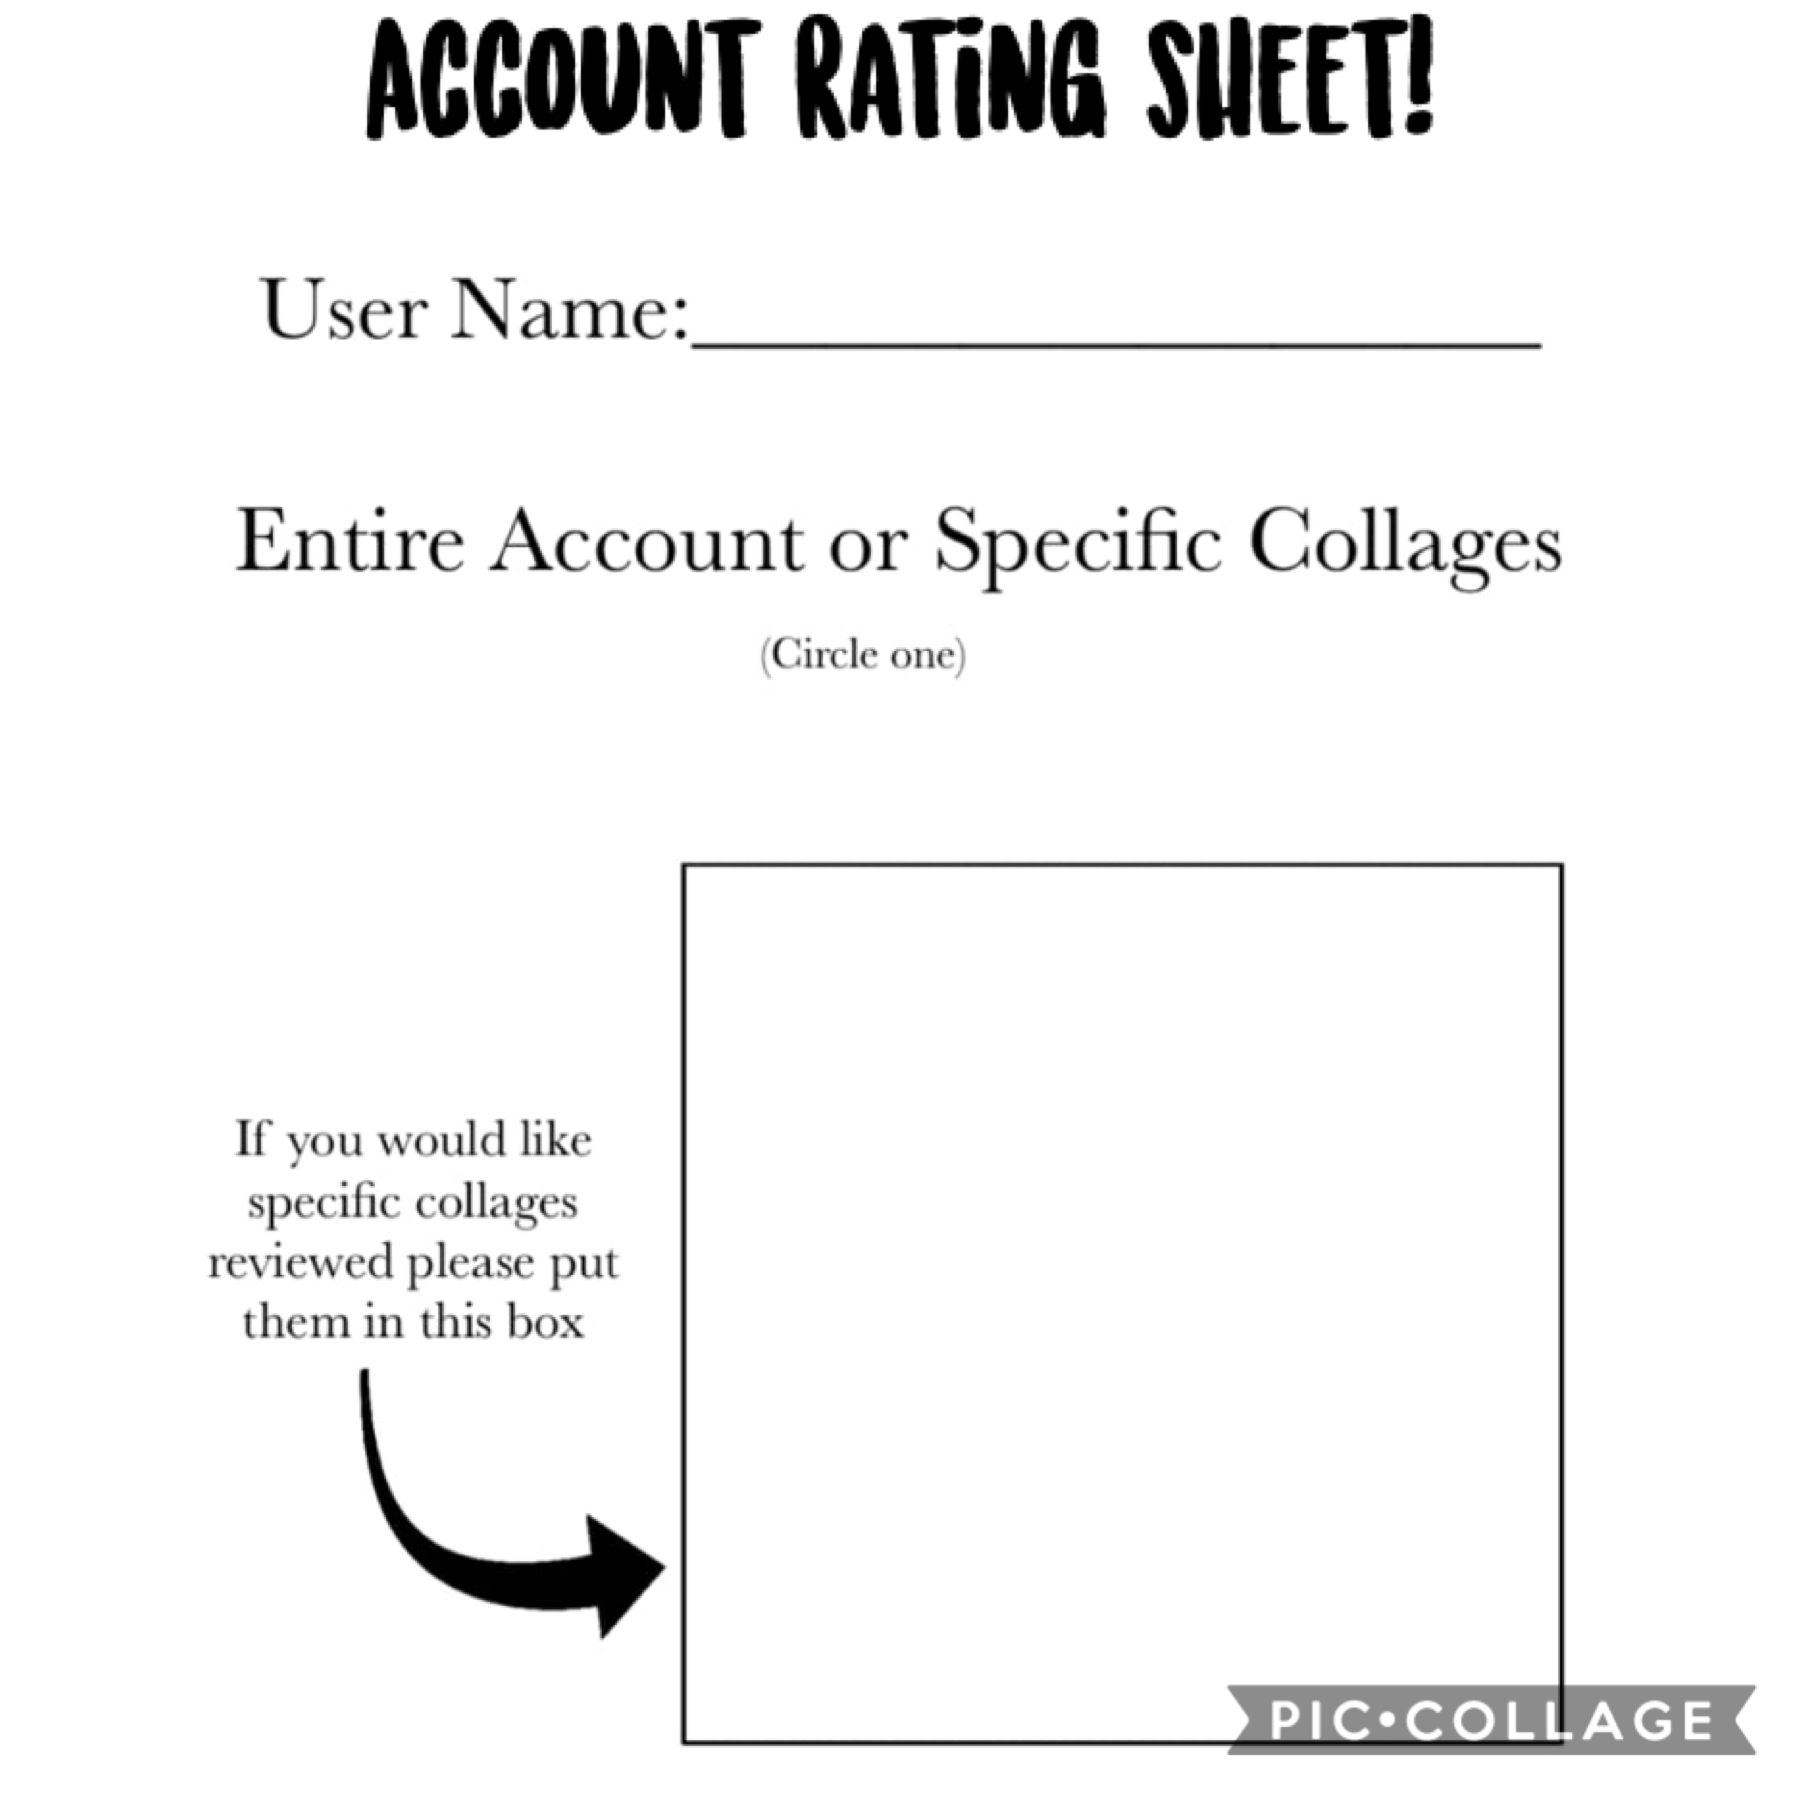 Tap👍







Fill out the sheet and I will rate ur account/a collage of ur choice!